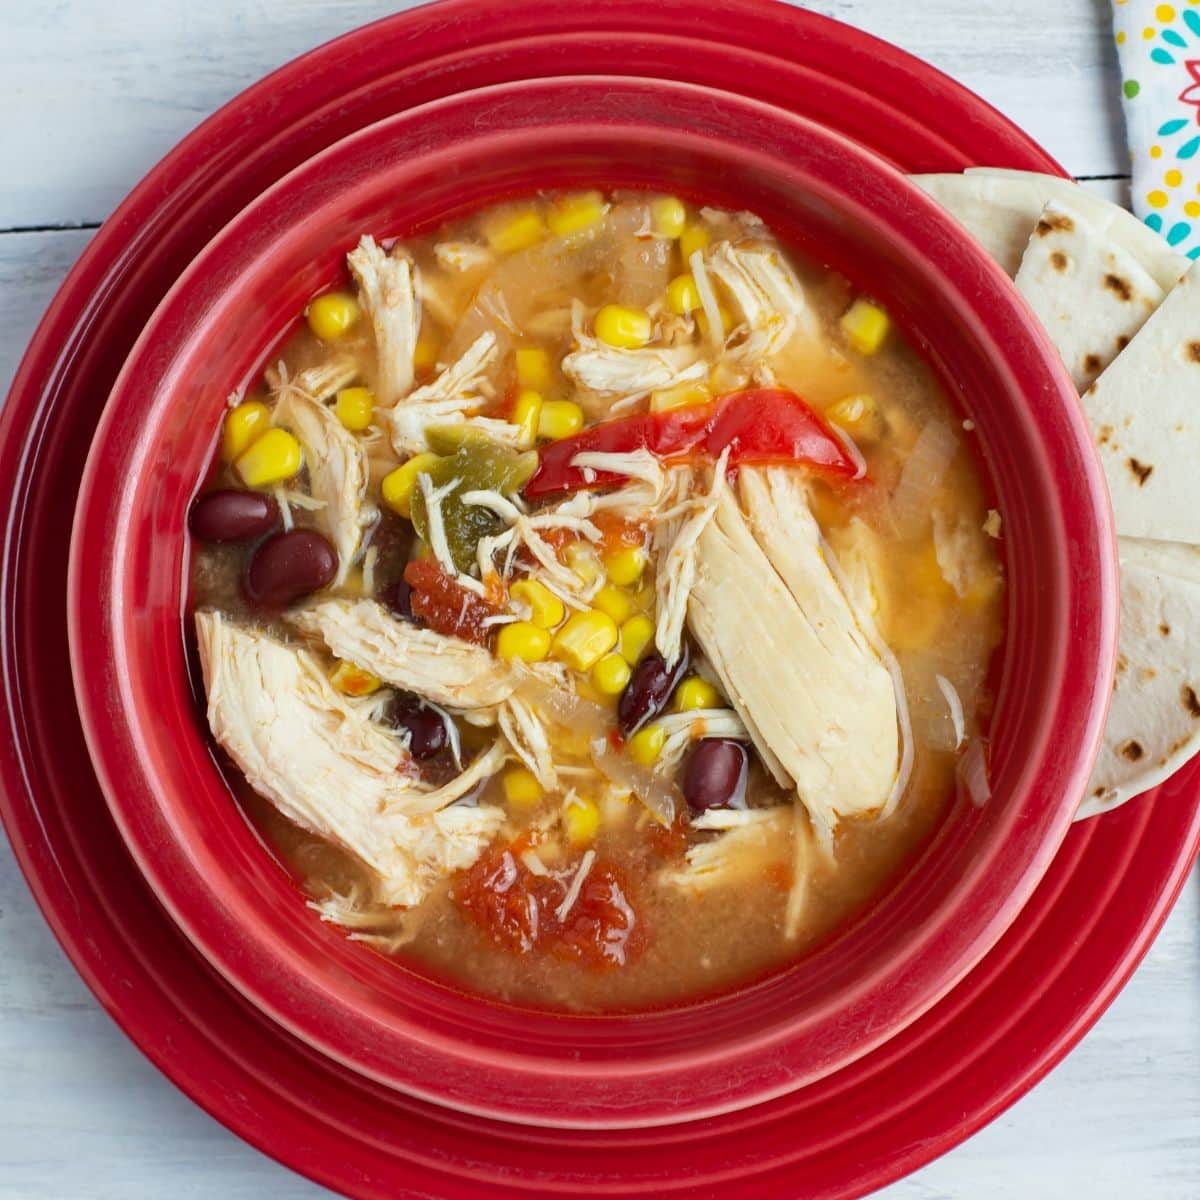 A red bowl filled with crock pot chicken soup recipes.